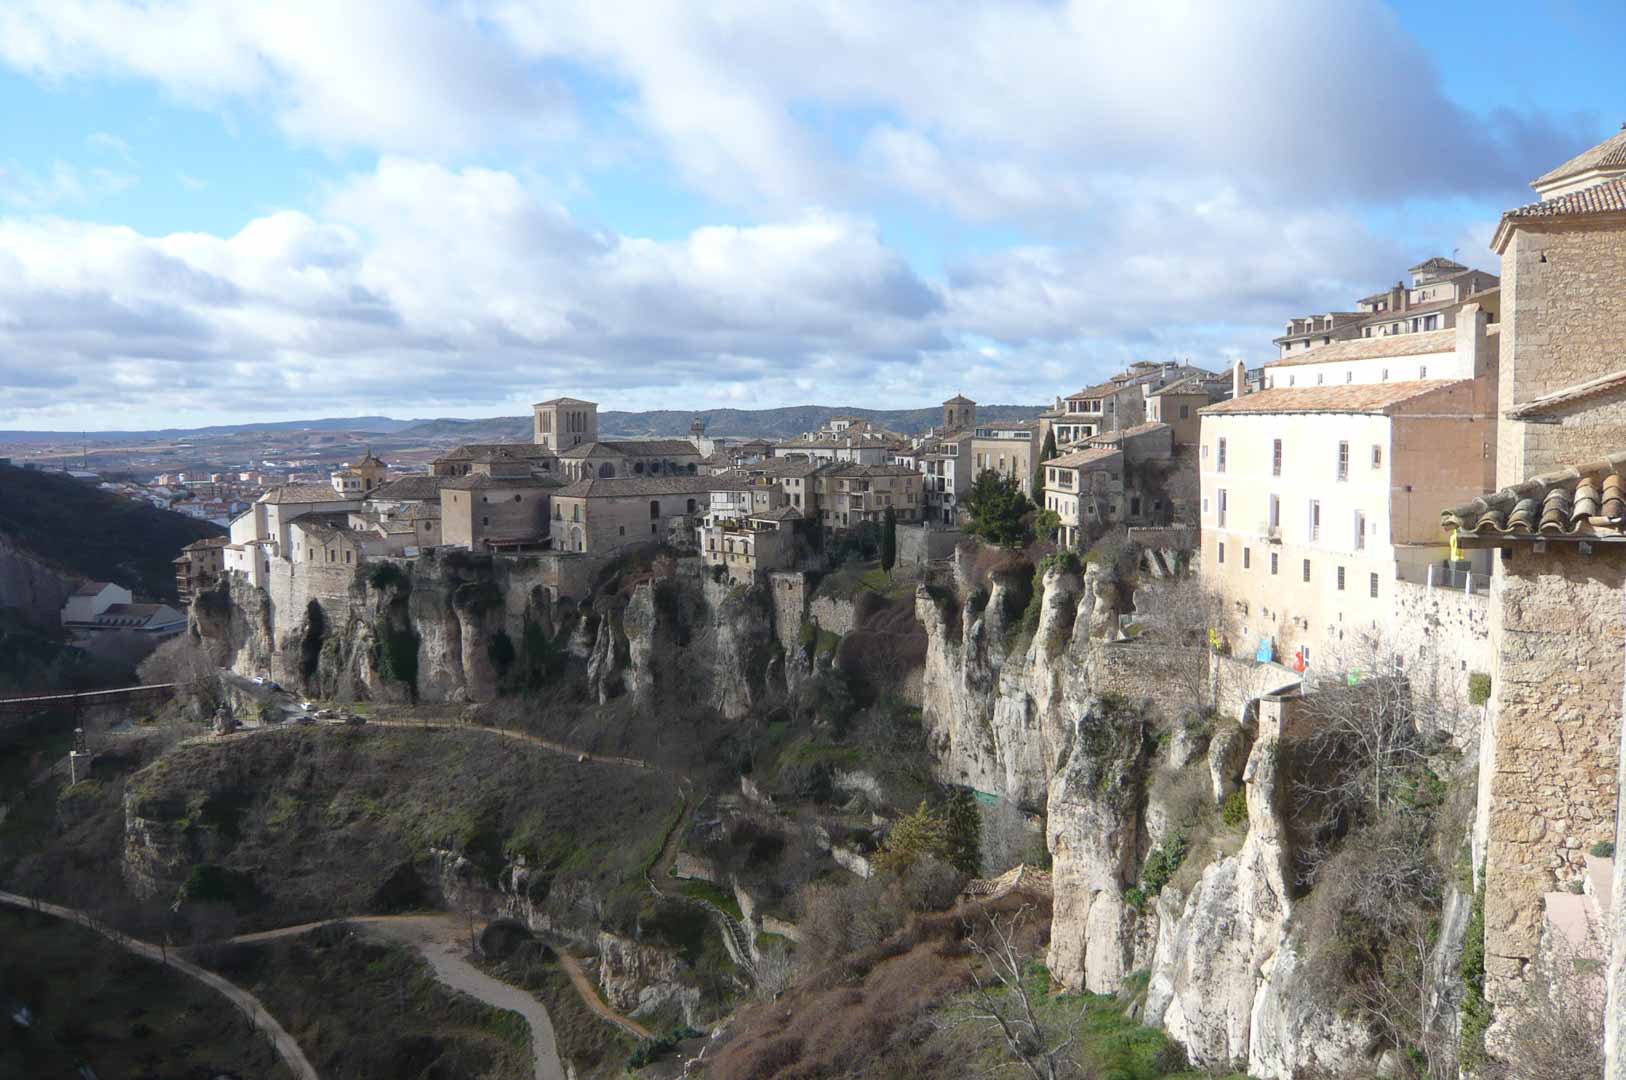 the hanging houses of cuenca